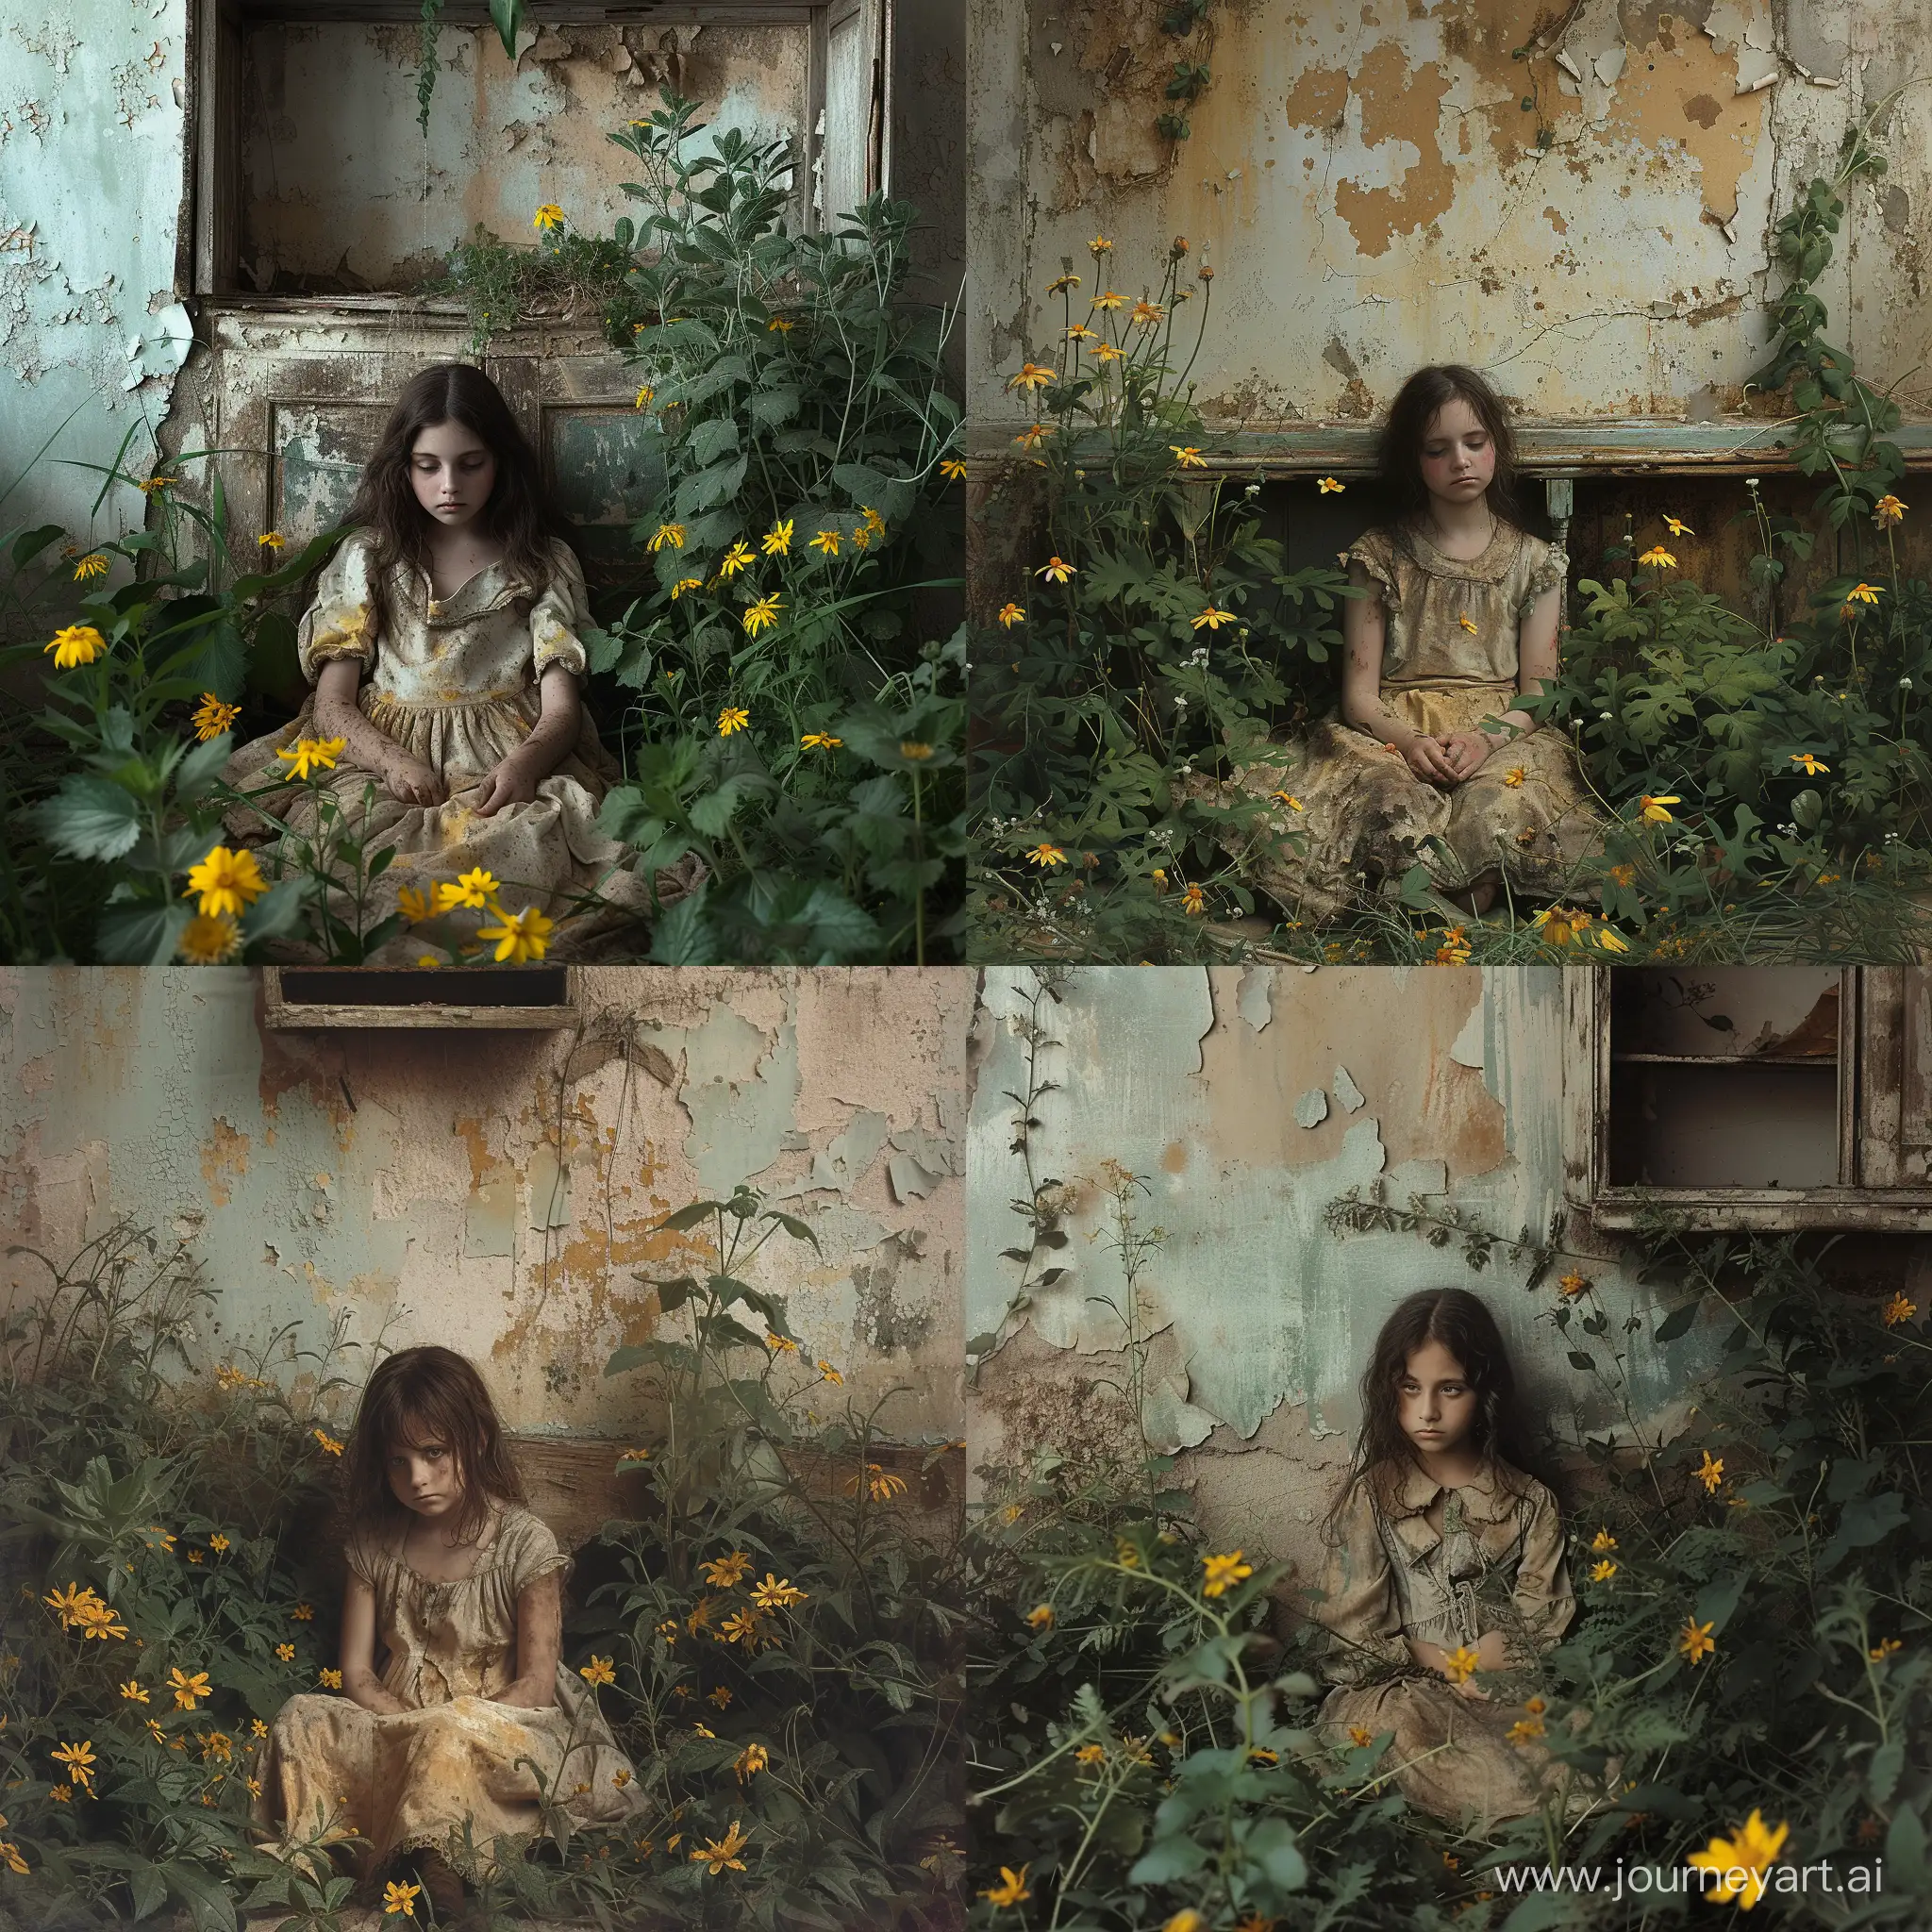 Lonely-Girl-in-Abandoned-Garden-Surrounded-by-Yellow-Flowers